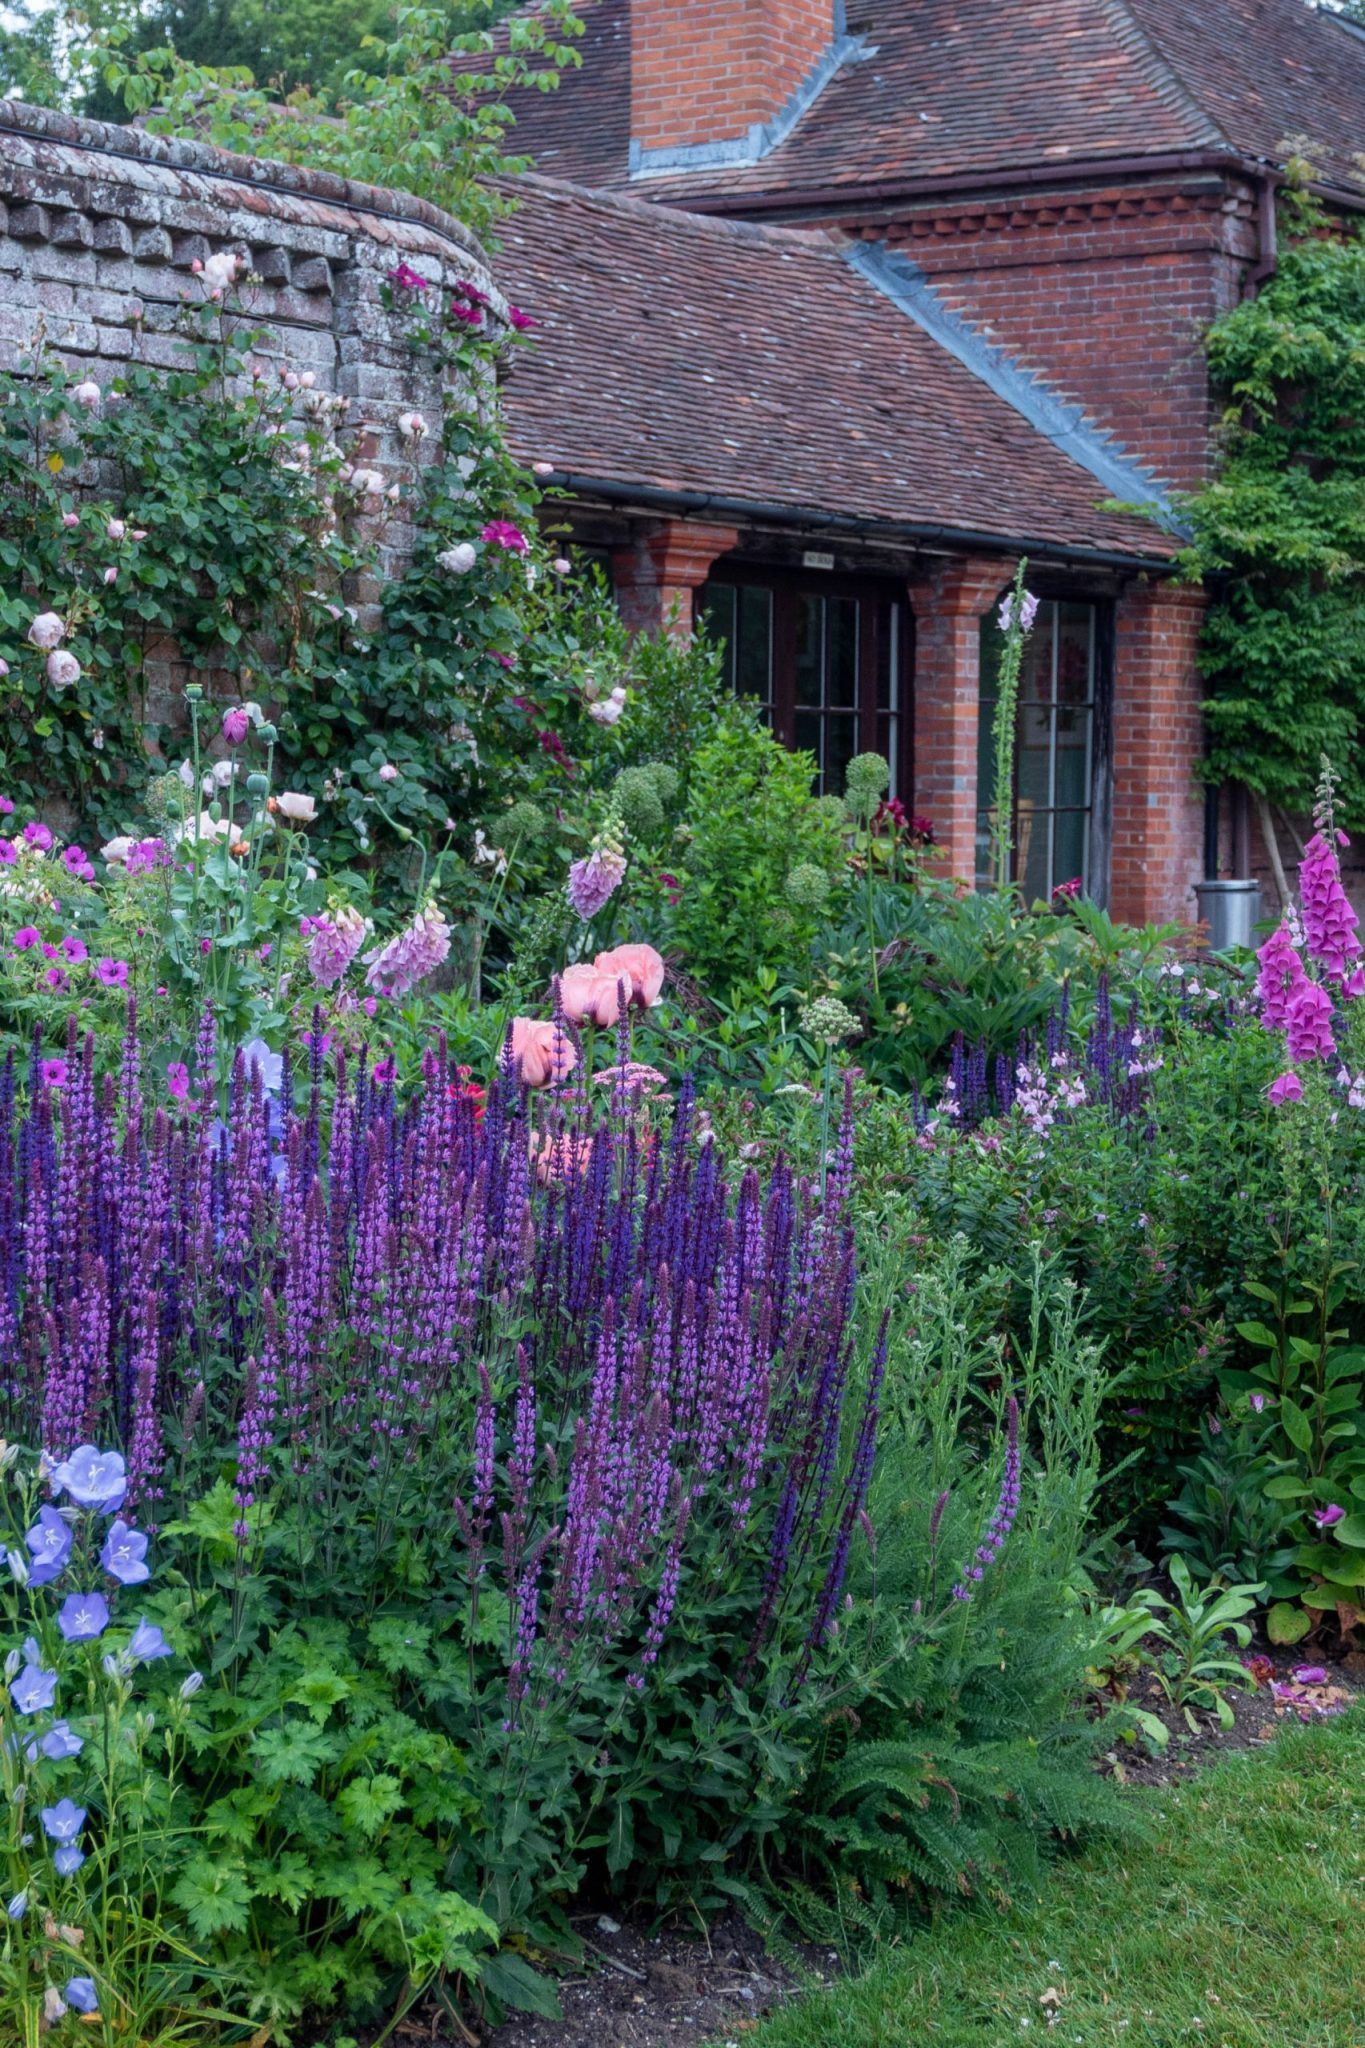 Exploring the Beauty of Rural Gardens